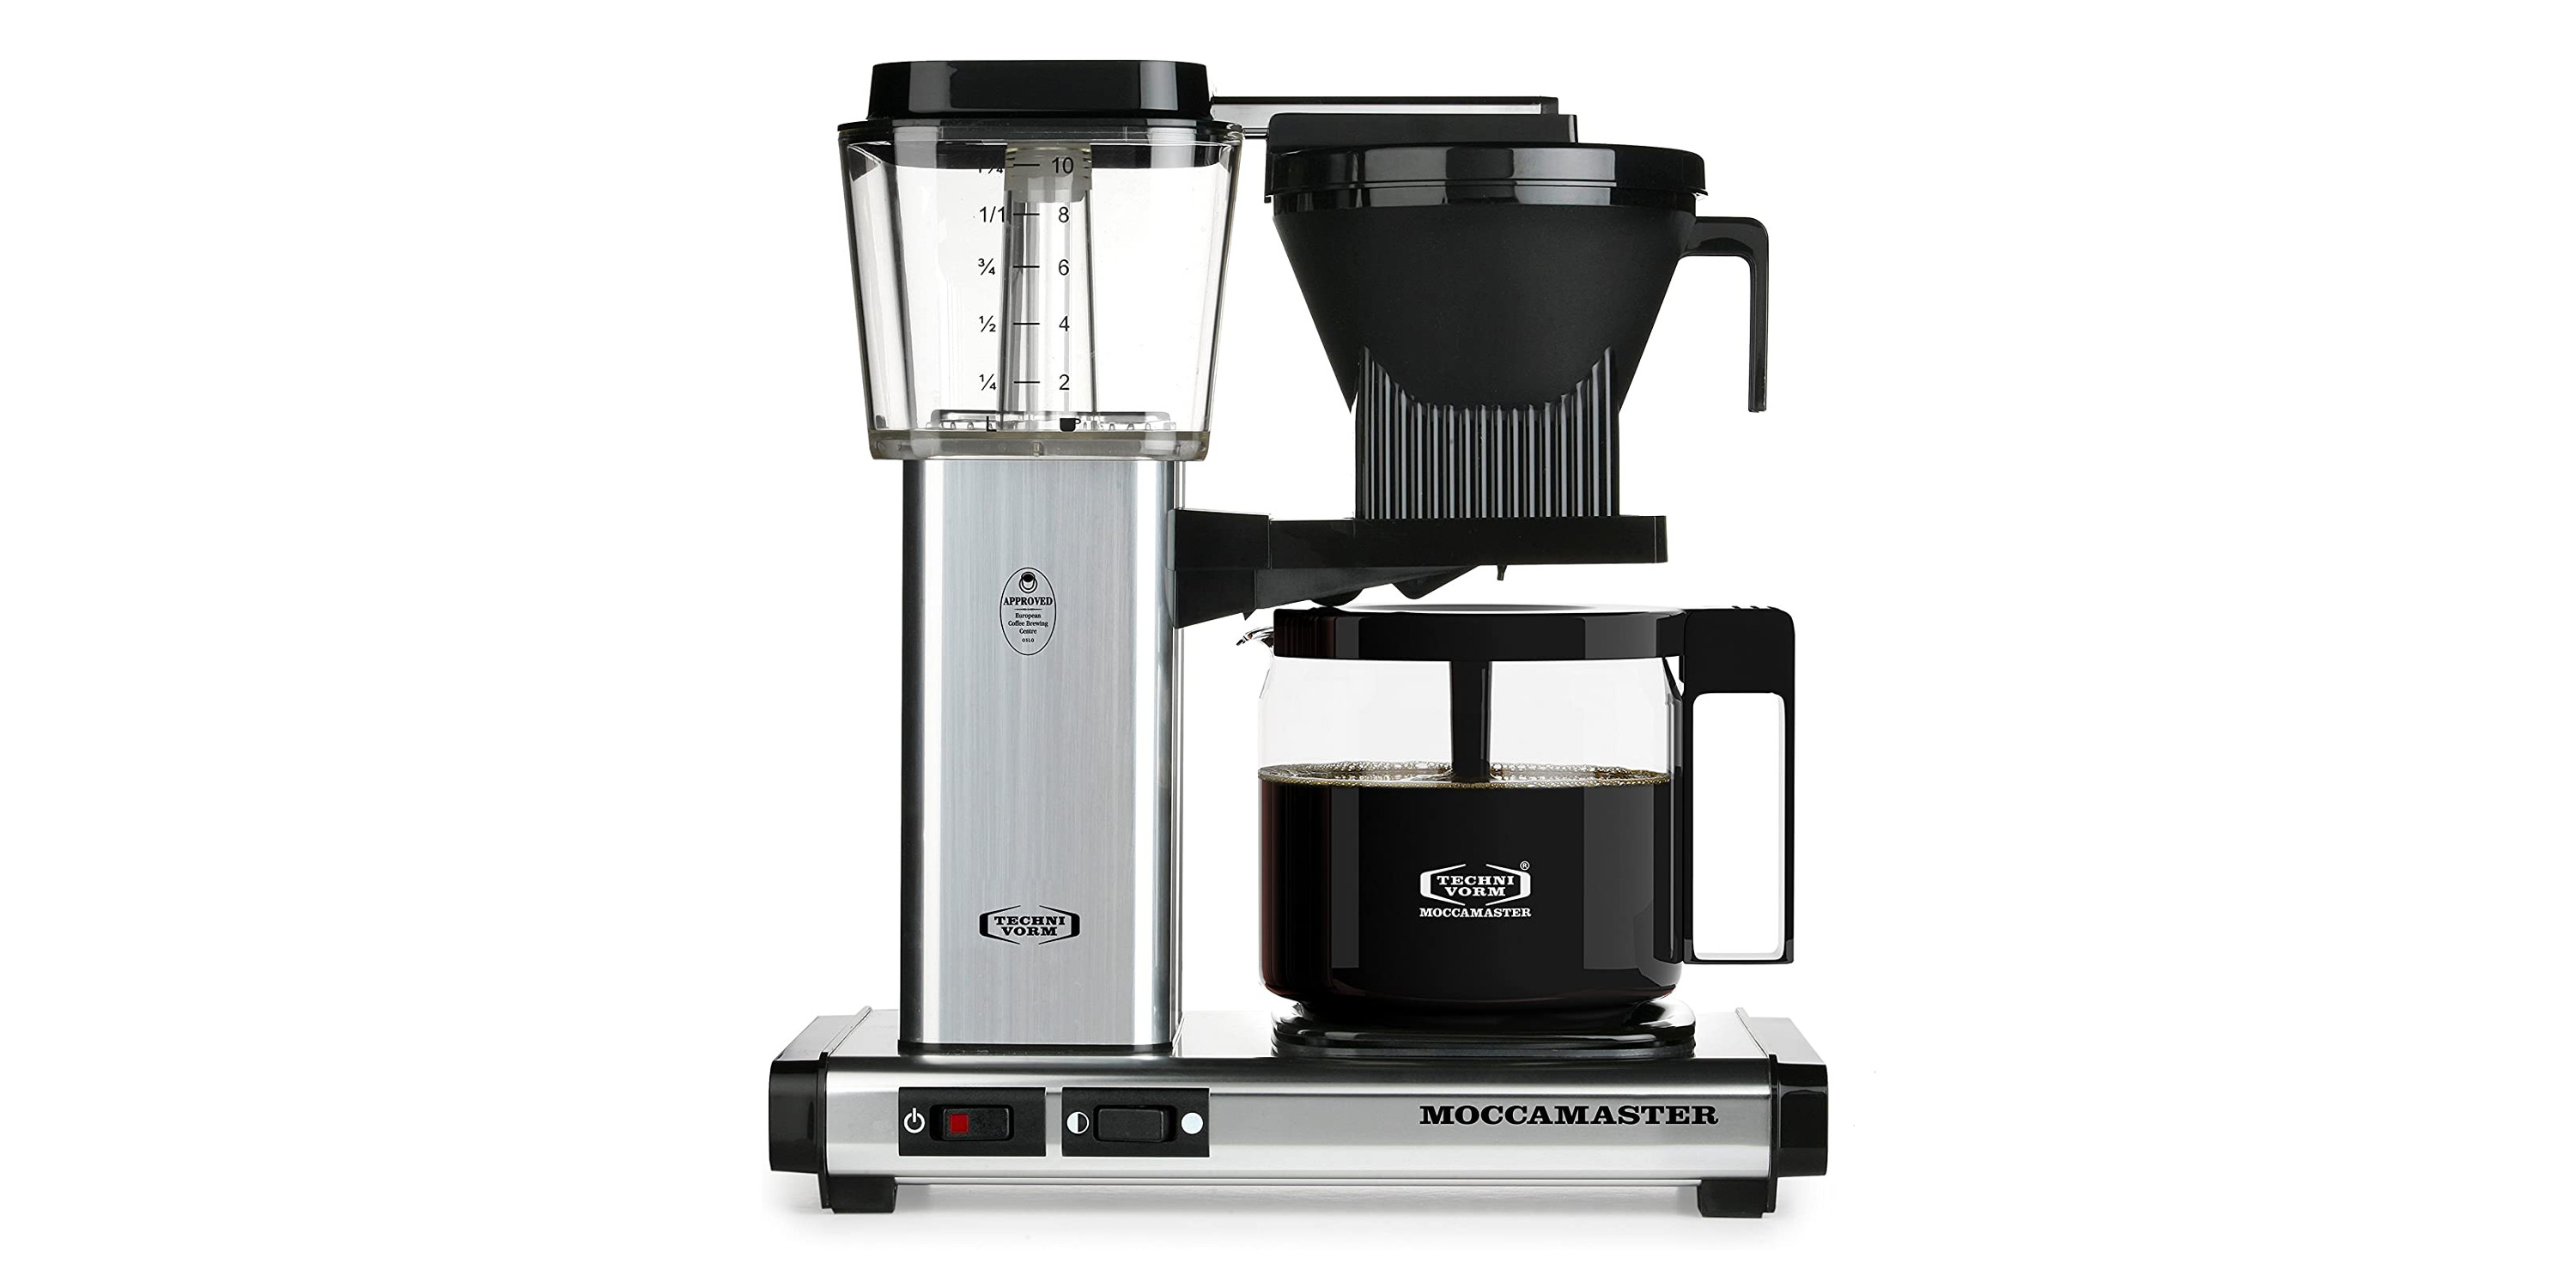 This Moccamaster coffee maker is over $100 off at